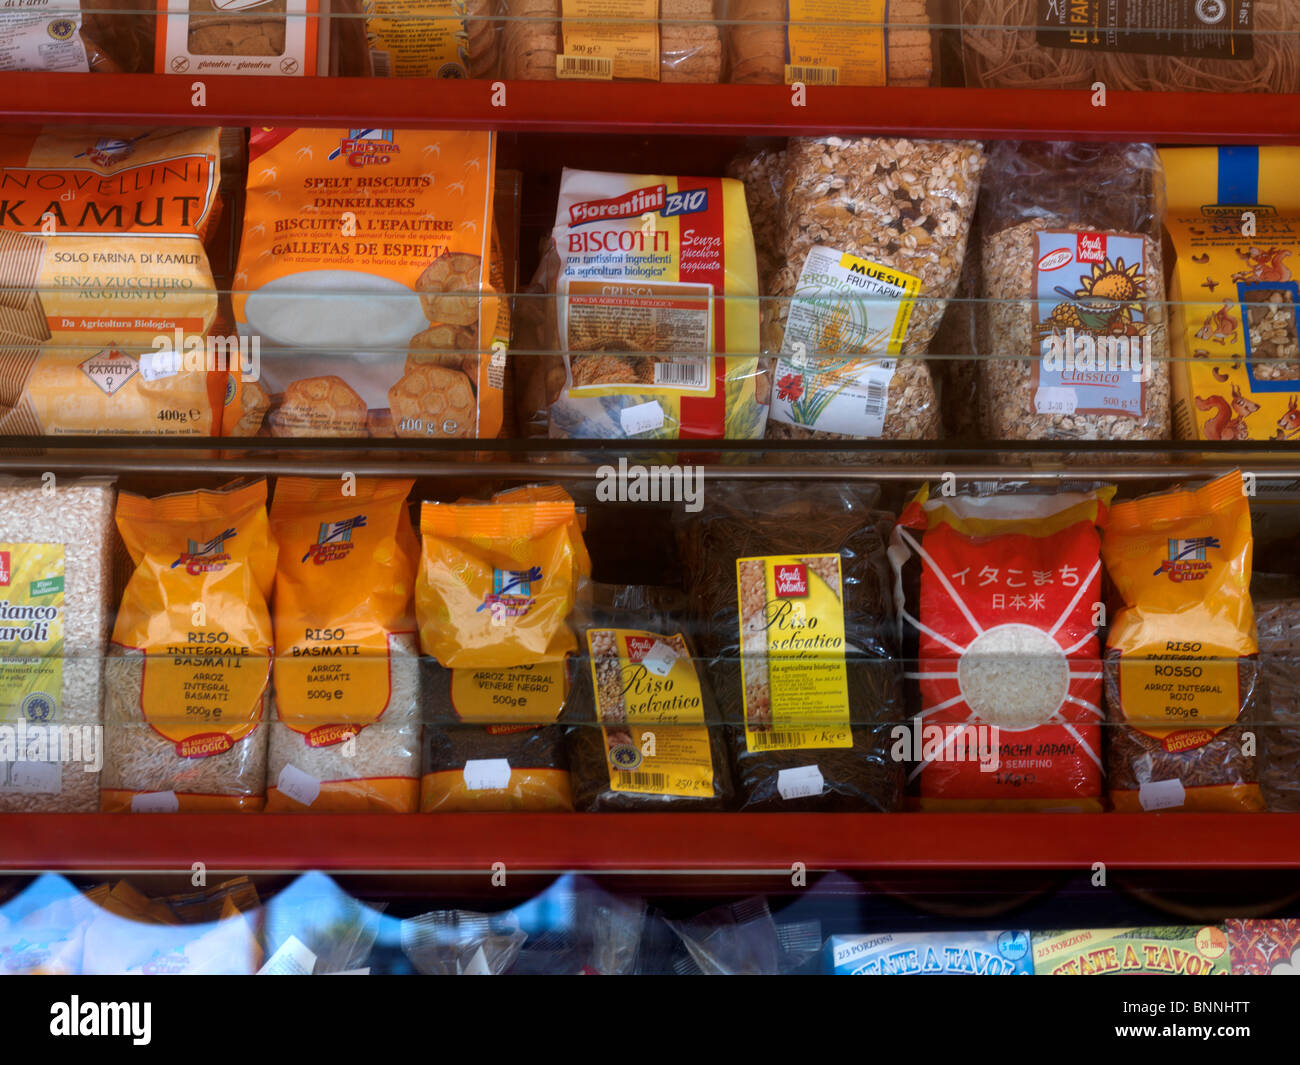 Rice Biscuits & Grain on supermarket shelves Catania Sicily Italy Stock Photo